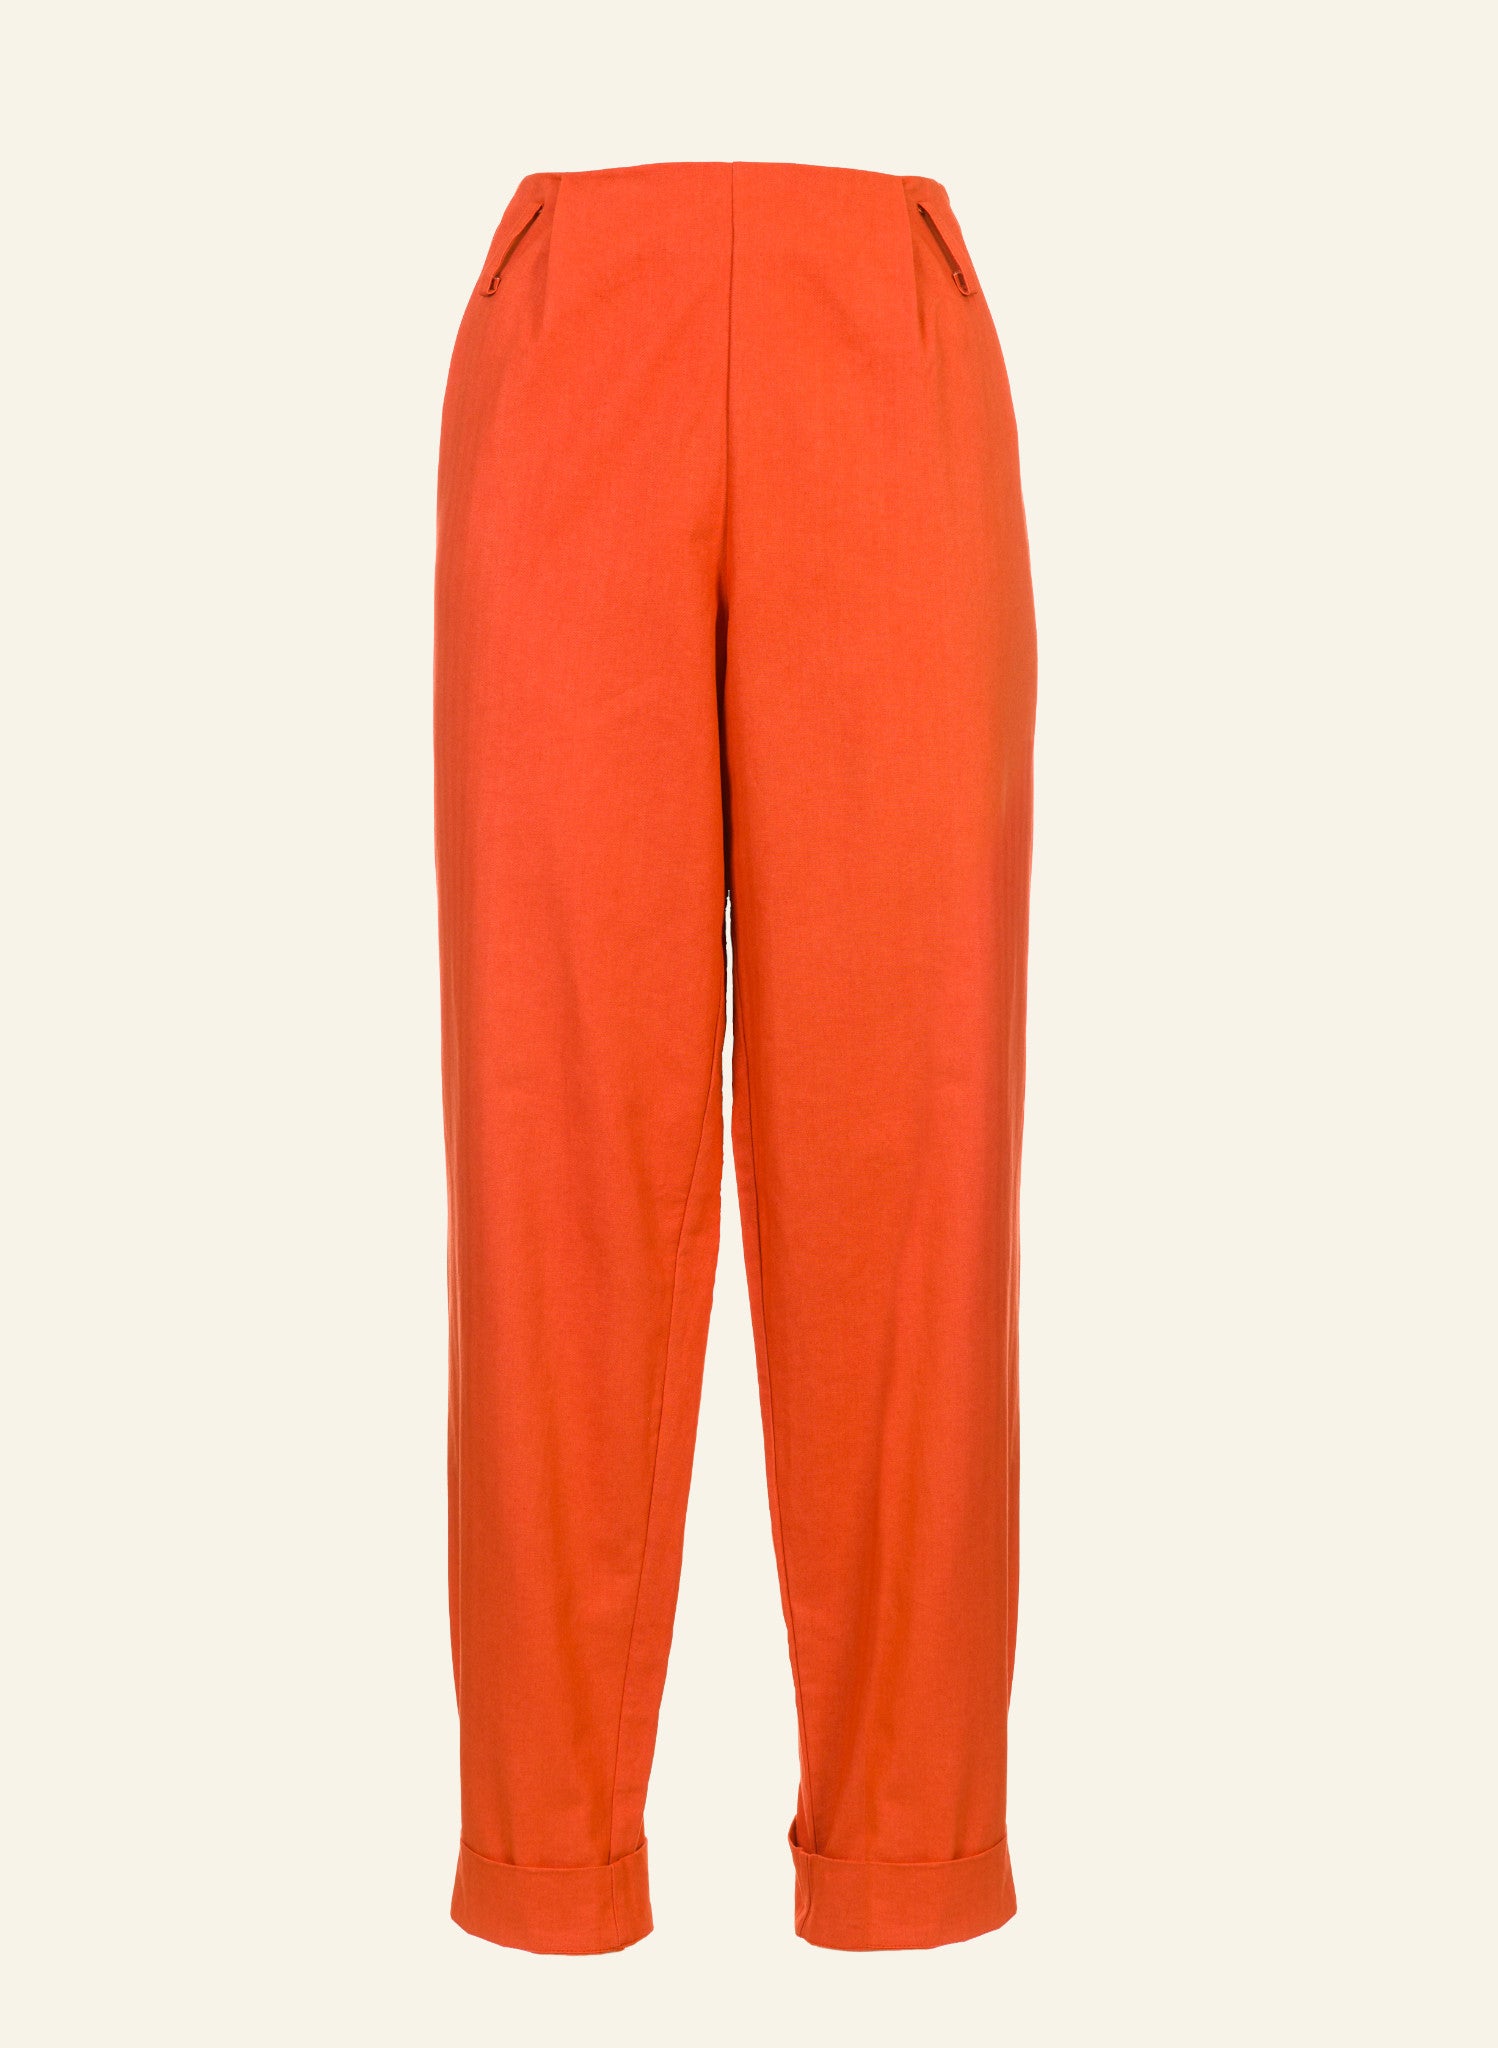 Wilma Trousers - Hot Coral Red